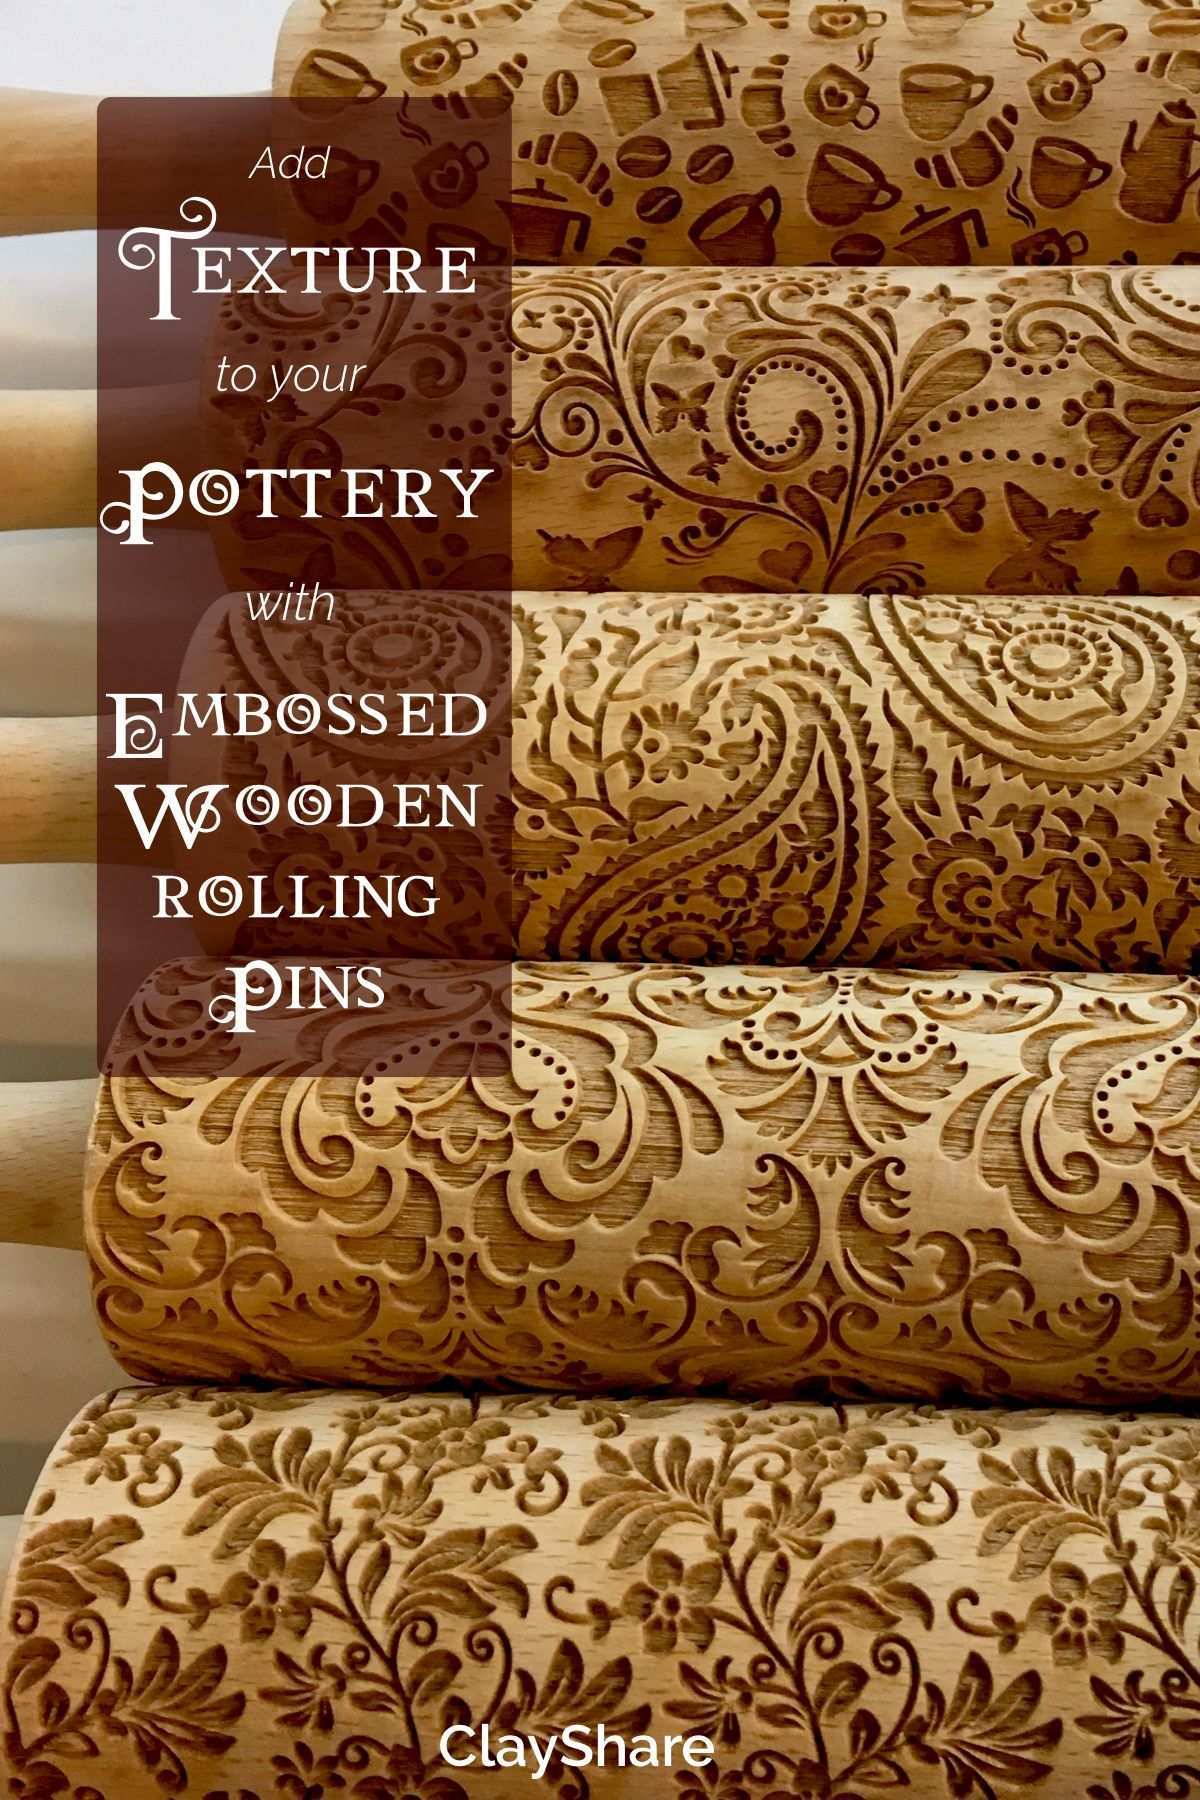 Embossed Wooden Rolling Pins Are A Fantastic Way To Add Gorgeous Texture To You Pottery Follow Clayshare For More Pottery Tut Clay Stamps Keramik Diy Topferei